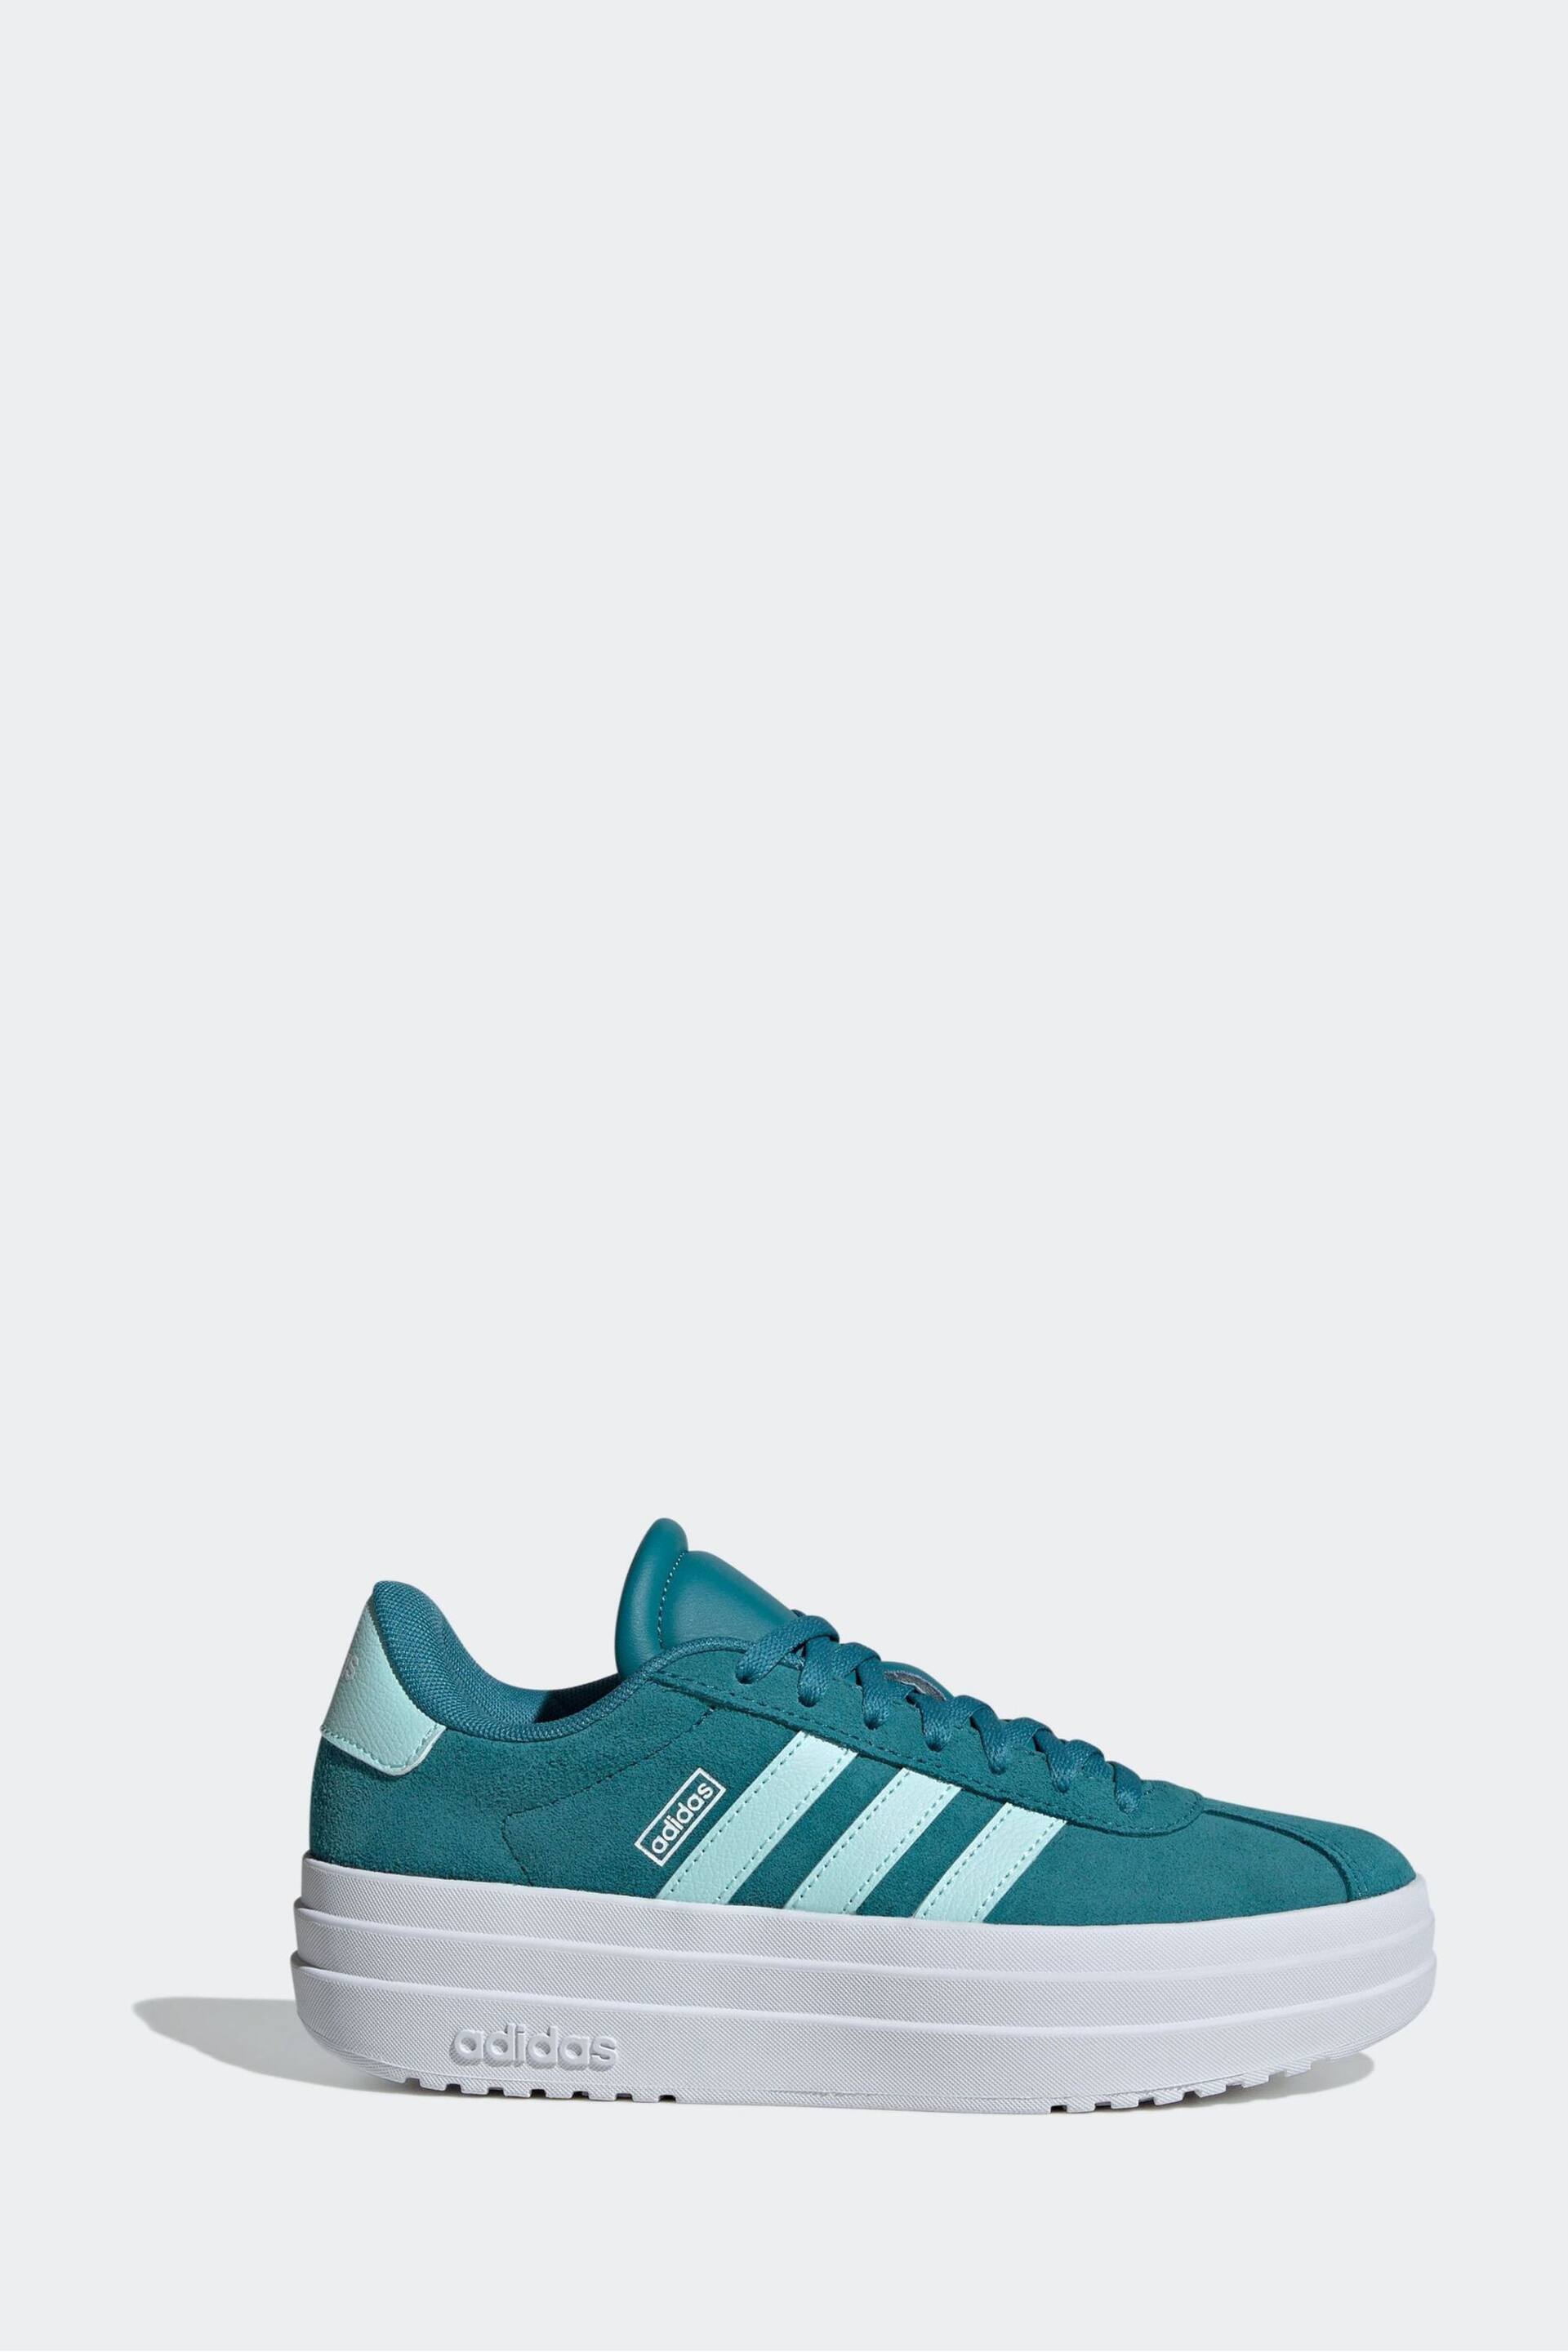 adidas Blue/White Kids VL Court Bold Trainers - Image 12 of 13